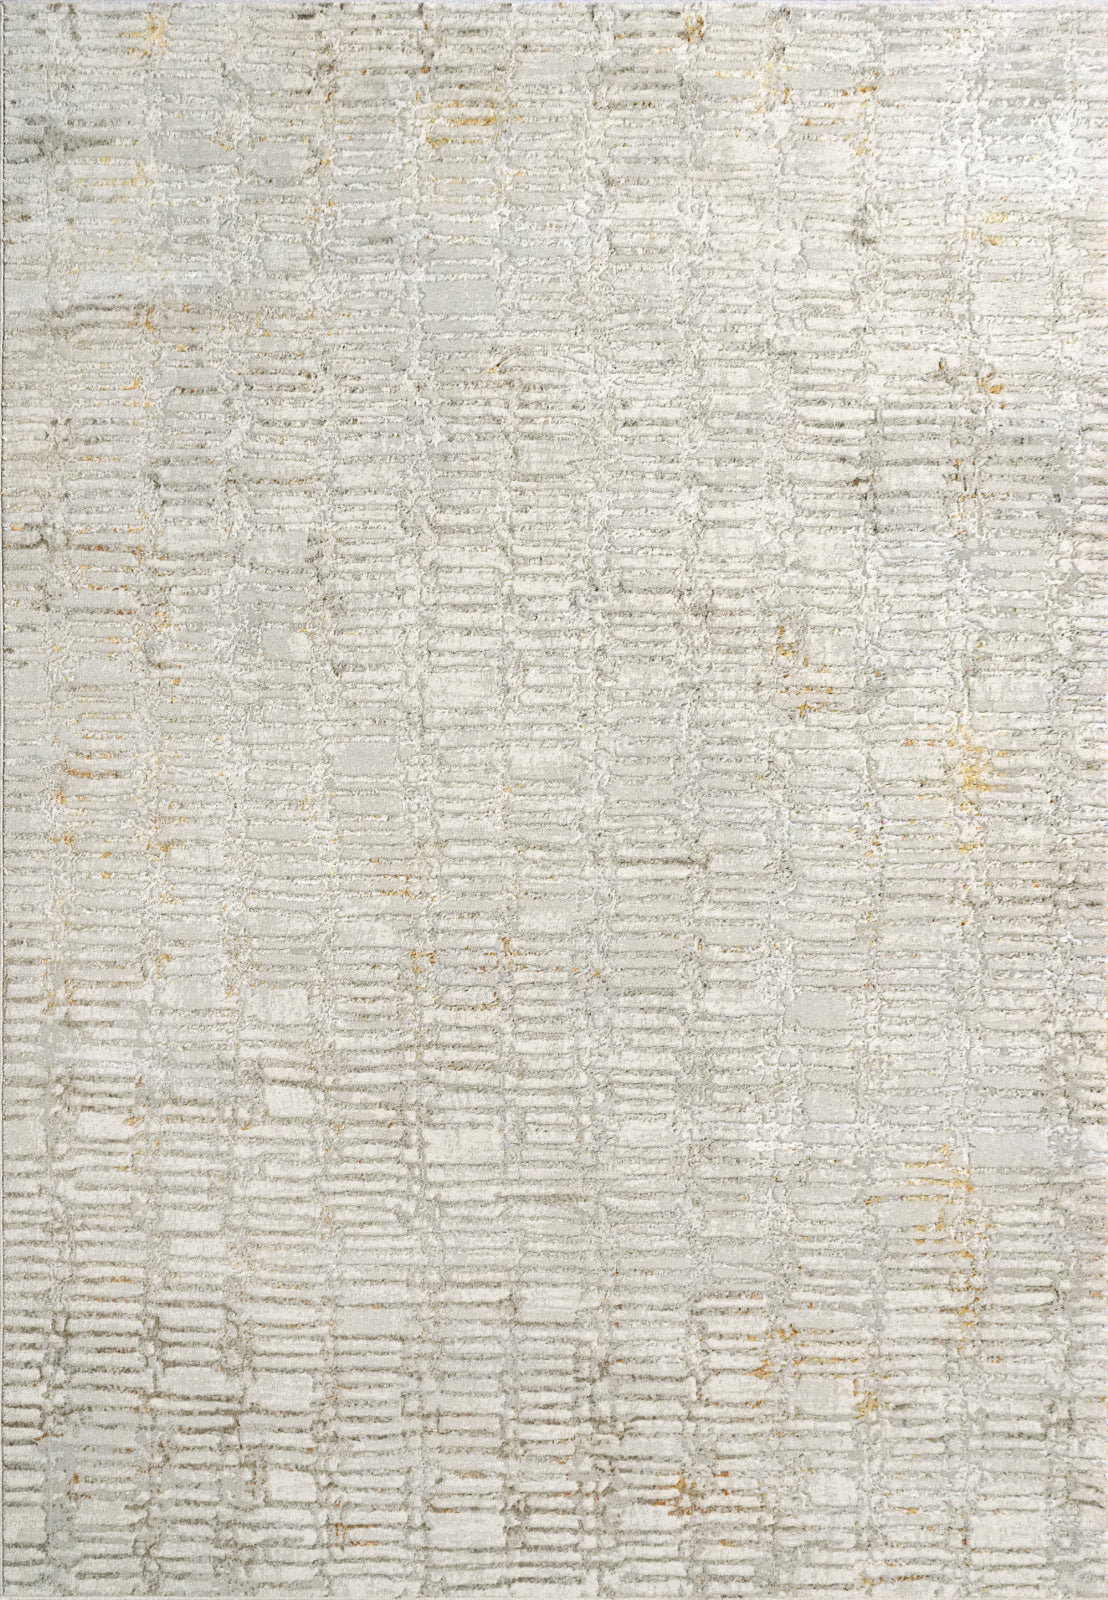 Dynamic Rugs Gold 1356 Cream/Silver/Gold Area Rug